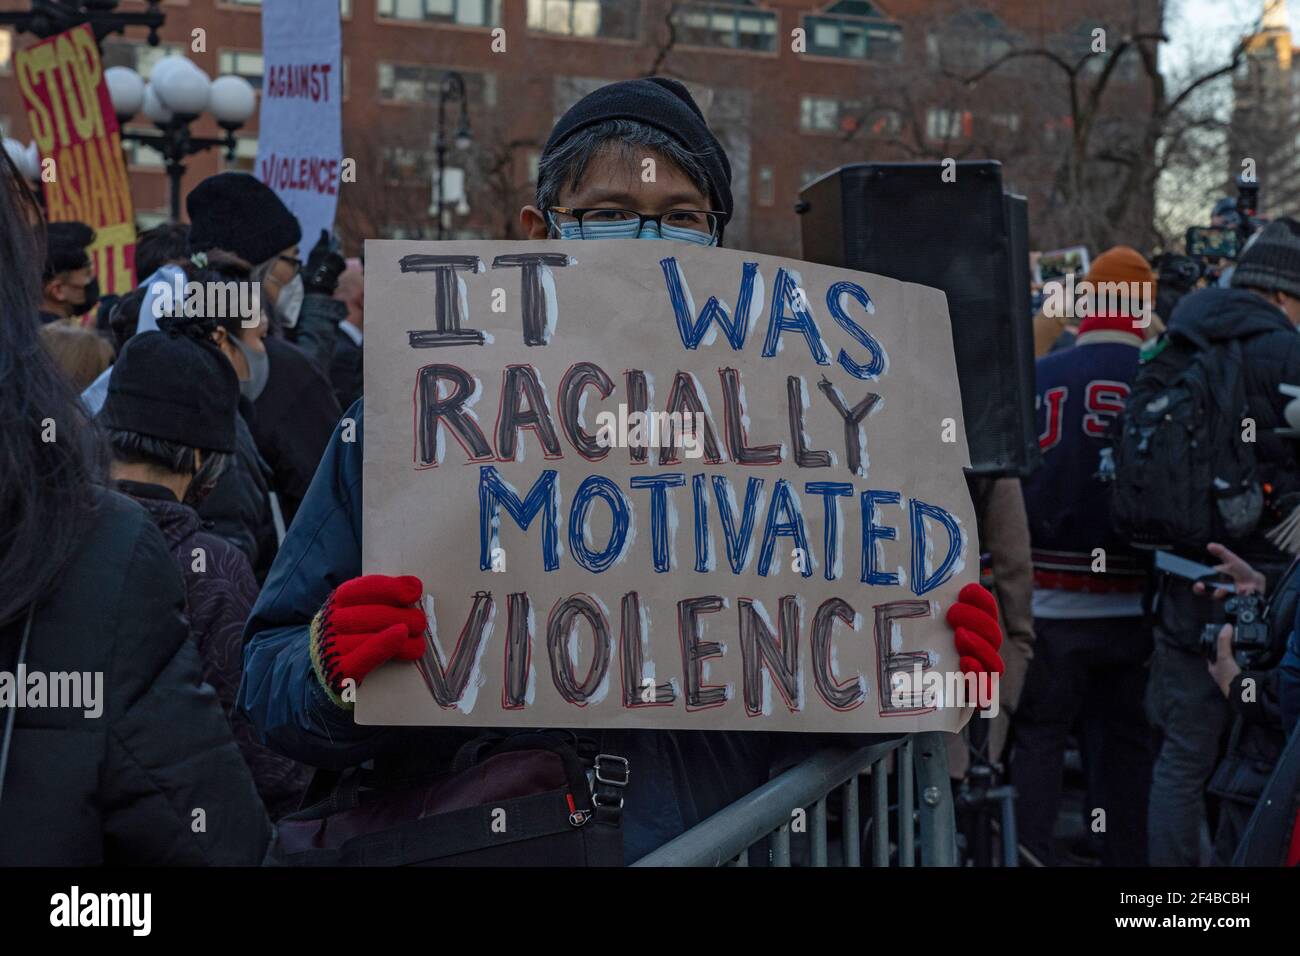 NEW YORK, NY - MARCH 19: A Protestor holds a sign that reads 'it was racially motivated violence' at a peace vigil to honor victims of attacks on Asians in Union Square Park on March 19, 2021 in New York City. On March 16th, eight people were killed at three Atlanta, Georgia area spas, six of whom were Asian women, in an attack that sent terror through the Asian community. Credit: Ron Adar/Alamy Live News Stock Photo